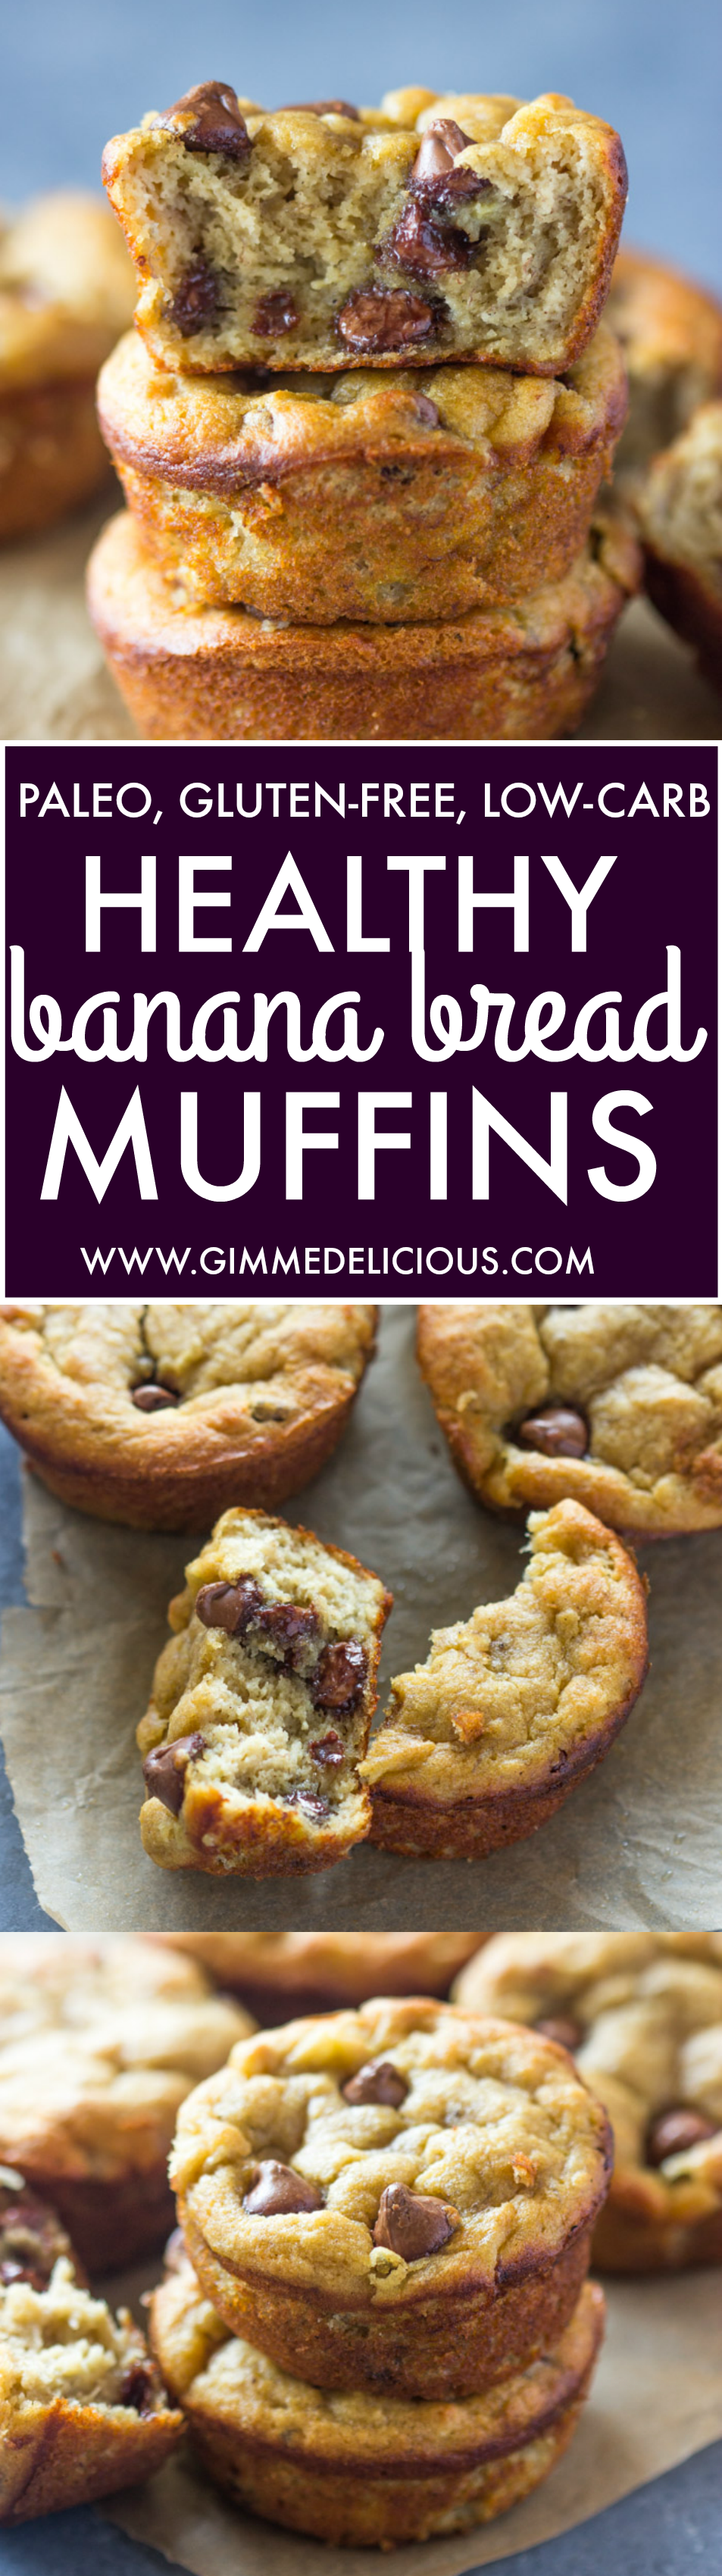 The Best Paleo Banana Bread Muffins (Gluten-Free, Low-Carb)